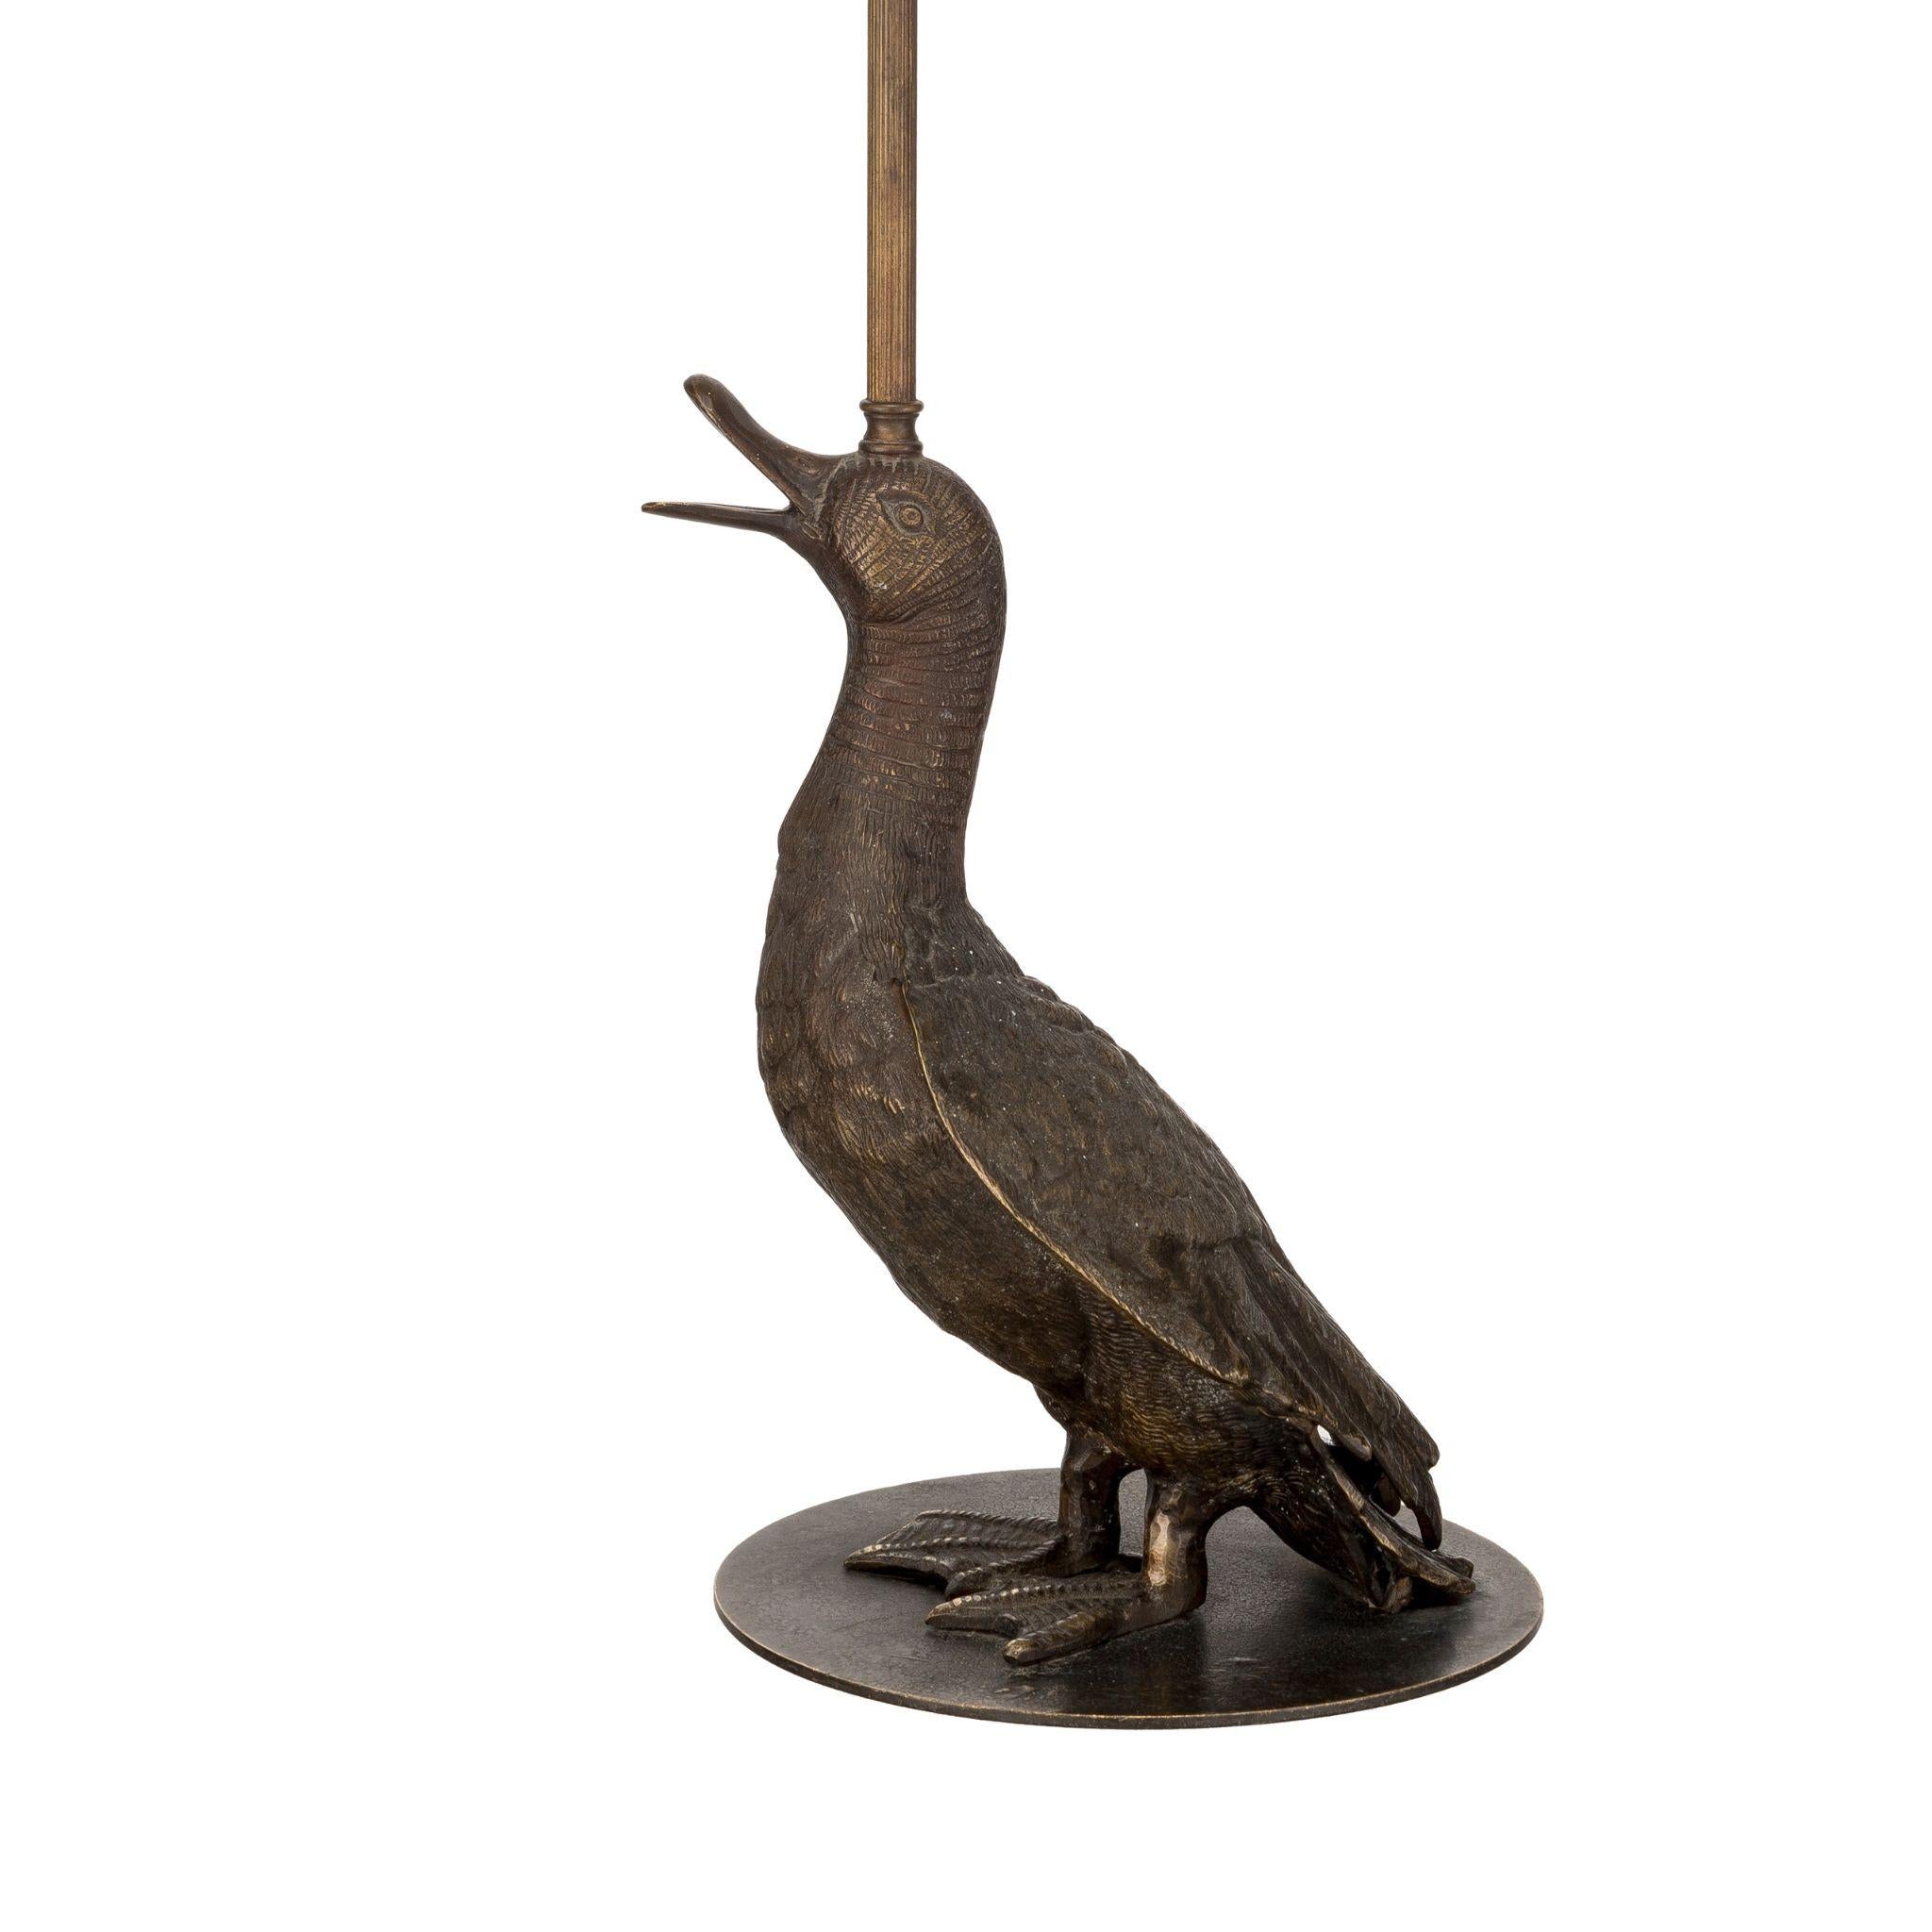 Keep your doors propped open in style with our adorable and durable duck door stop. Perfect for preventing slamming and adding charm to any room, it's a must-have for any home. Shop now and add a touch of whimsy to your decor.